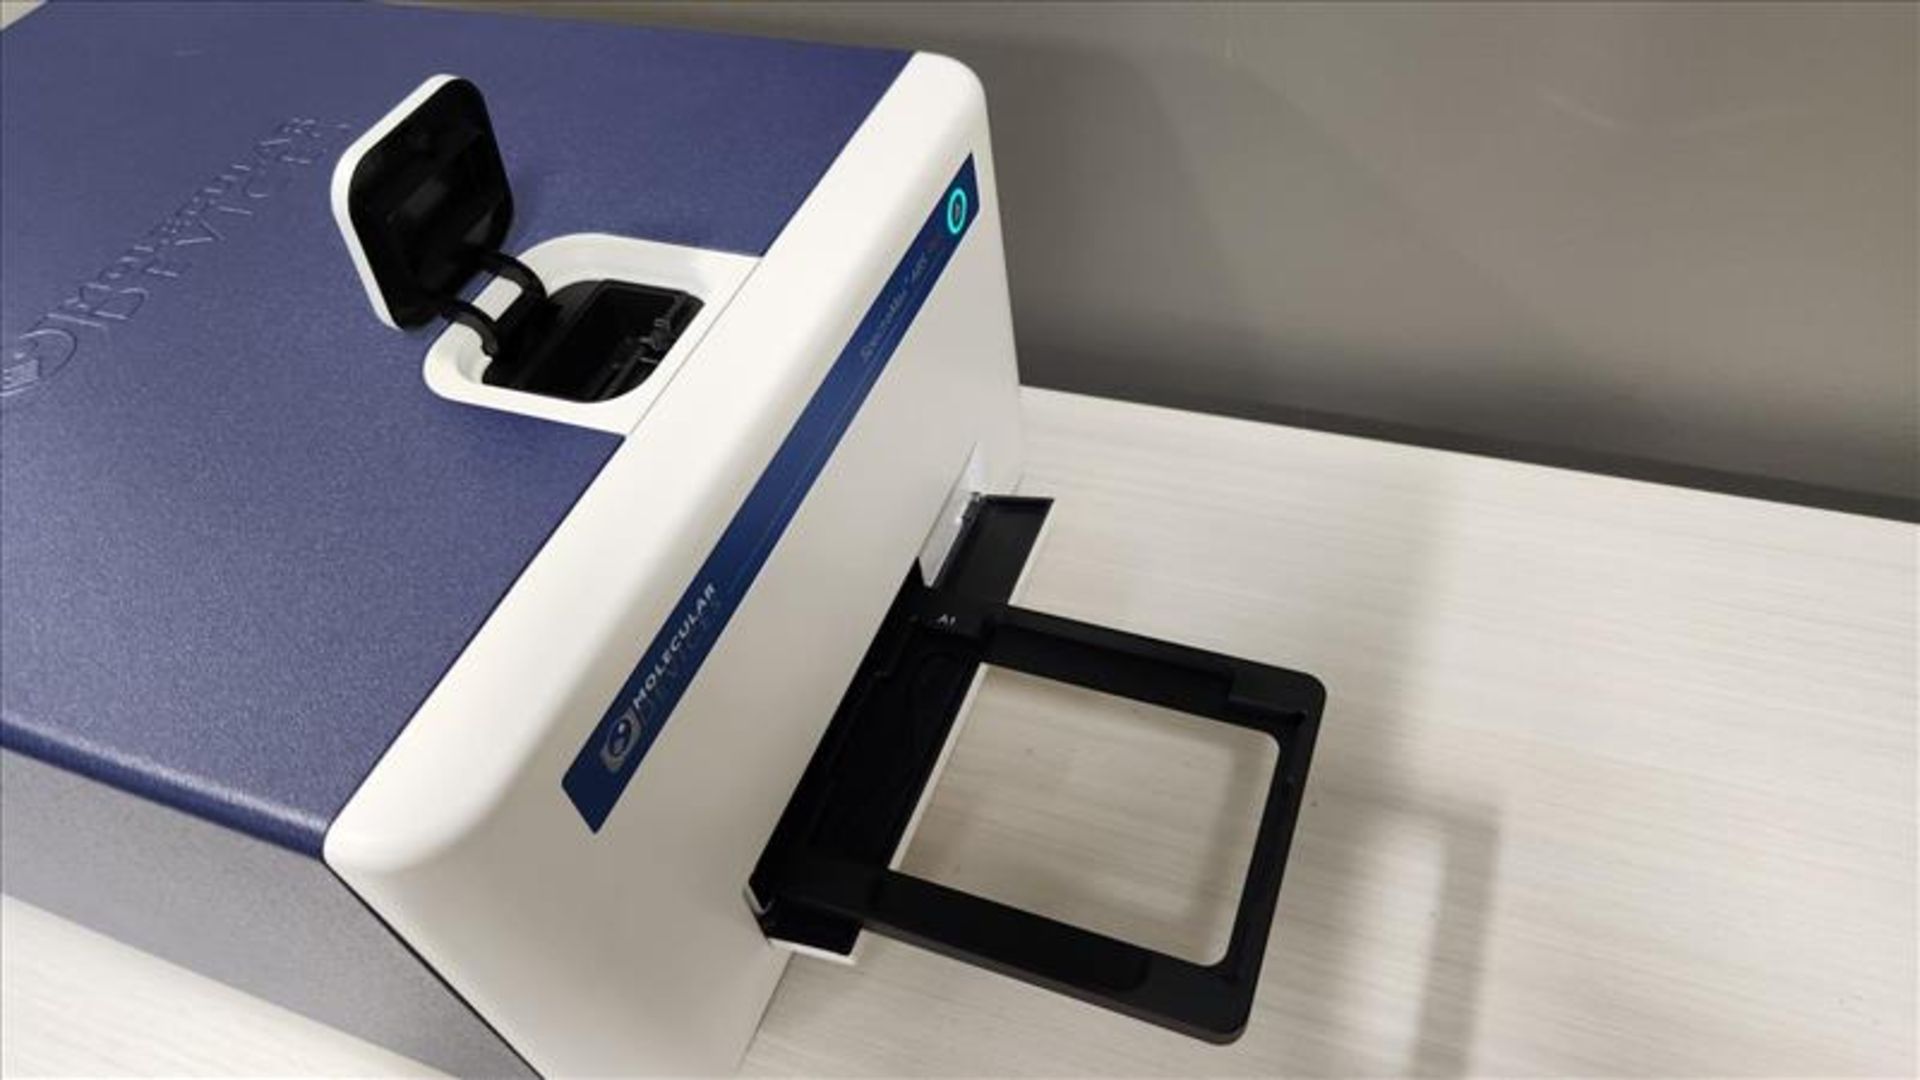 Molecular Devices SpectraMax ABS Plus Absorbance Microplate Reader, S/N ABP01300 with SoftMax Pro - Image 10 of 15